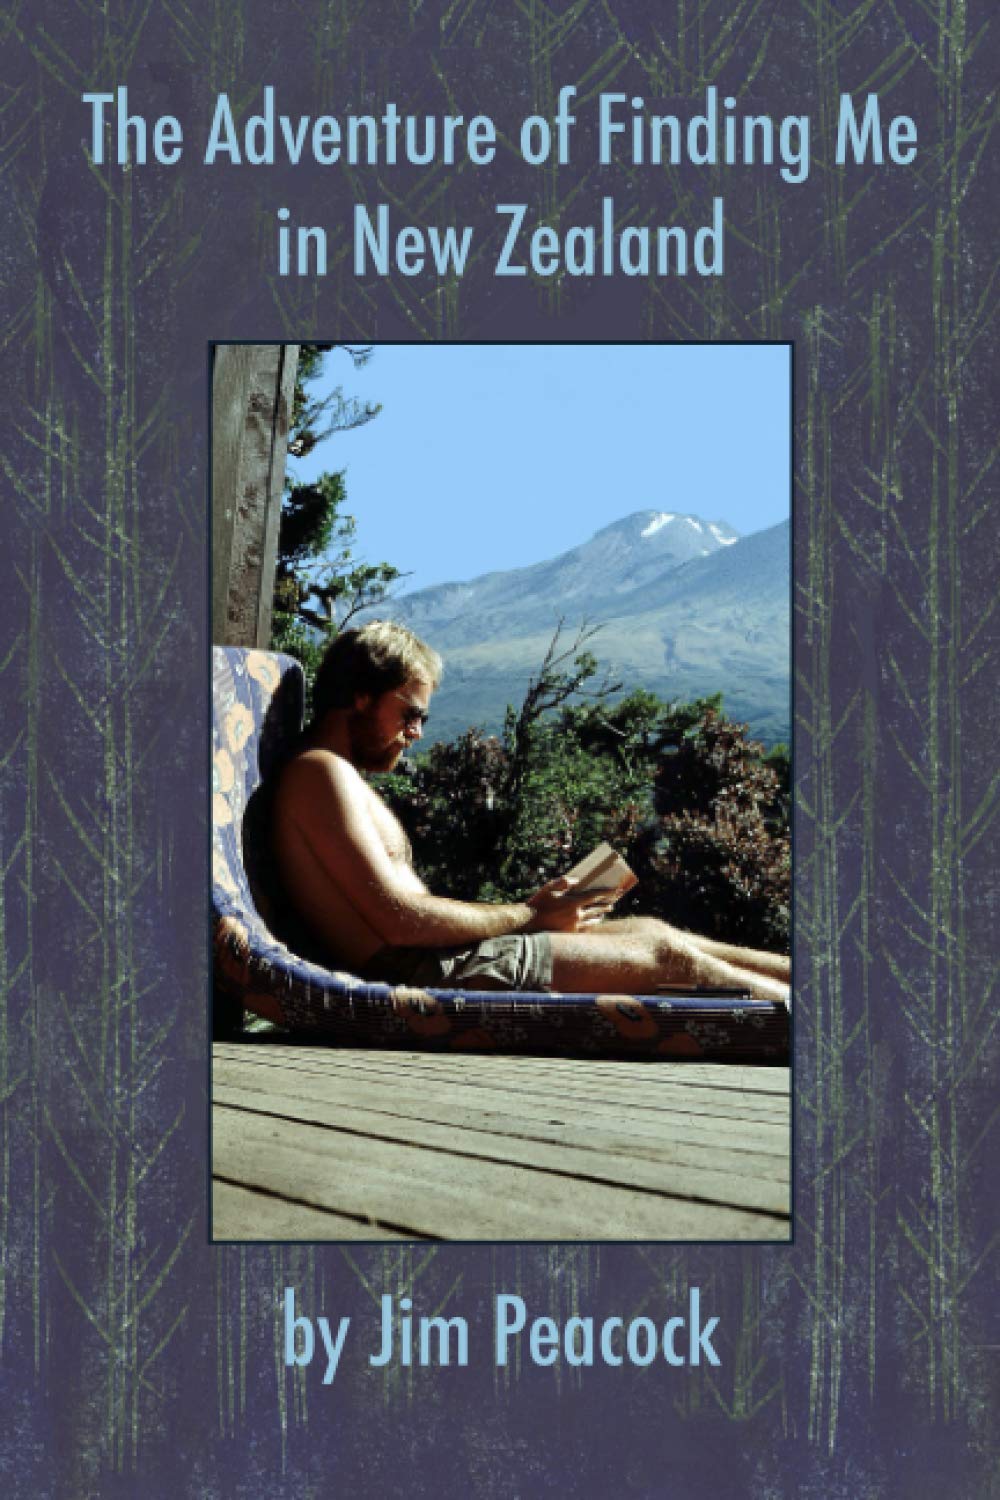 The Adventure of Finding Me in New Zealand